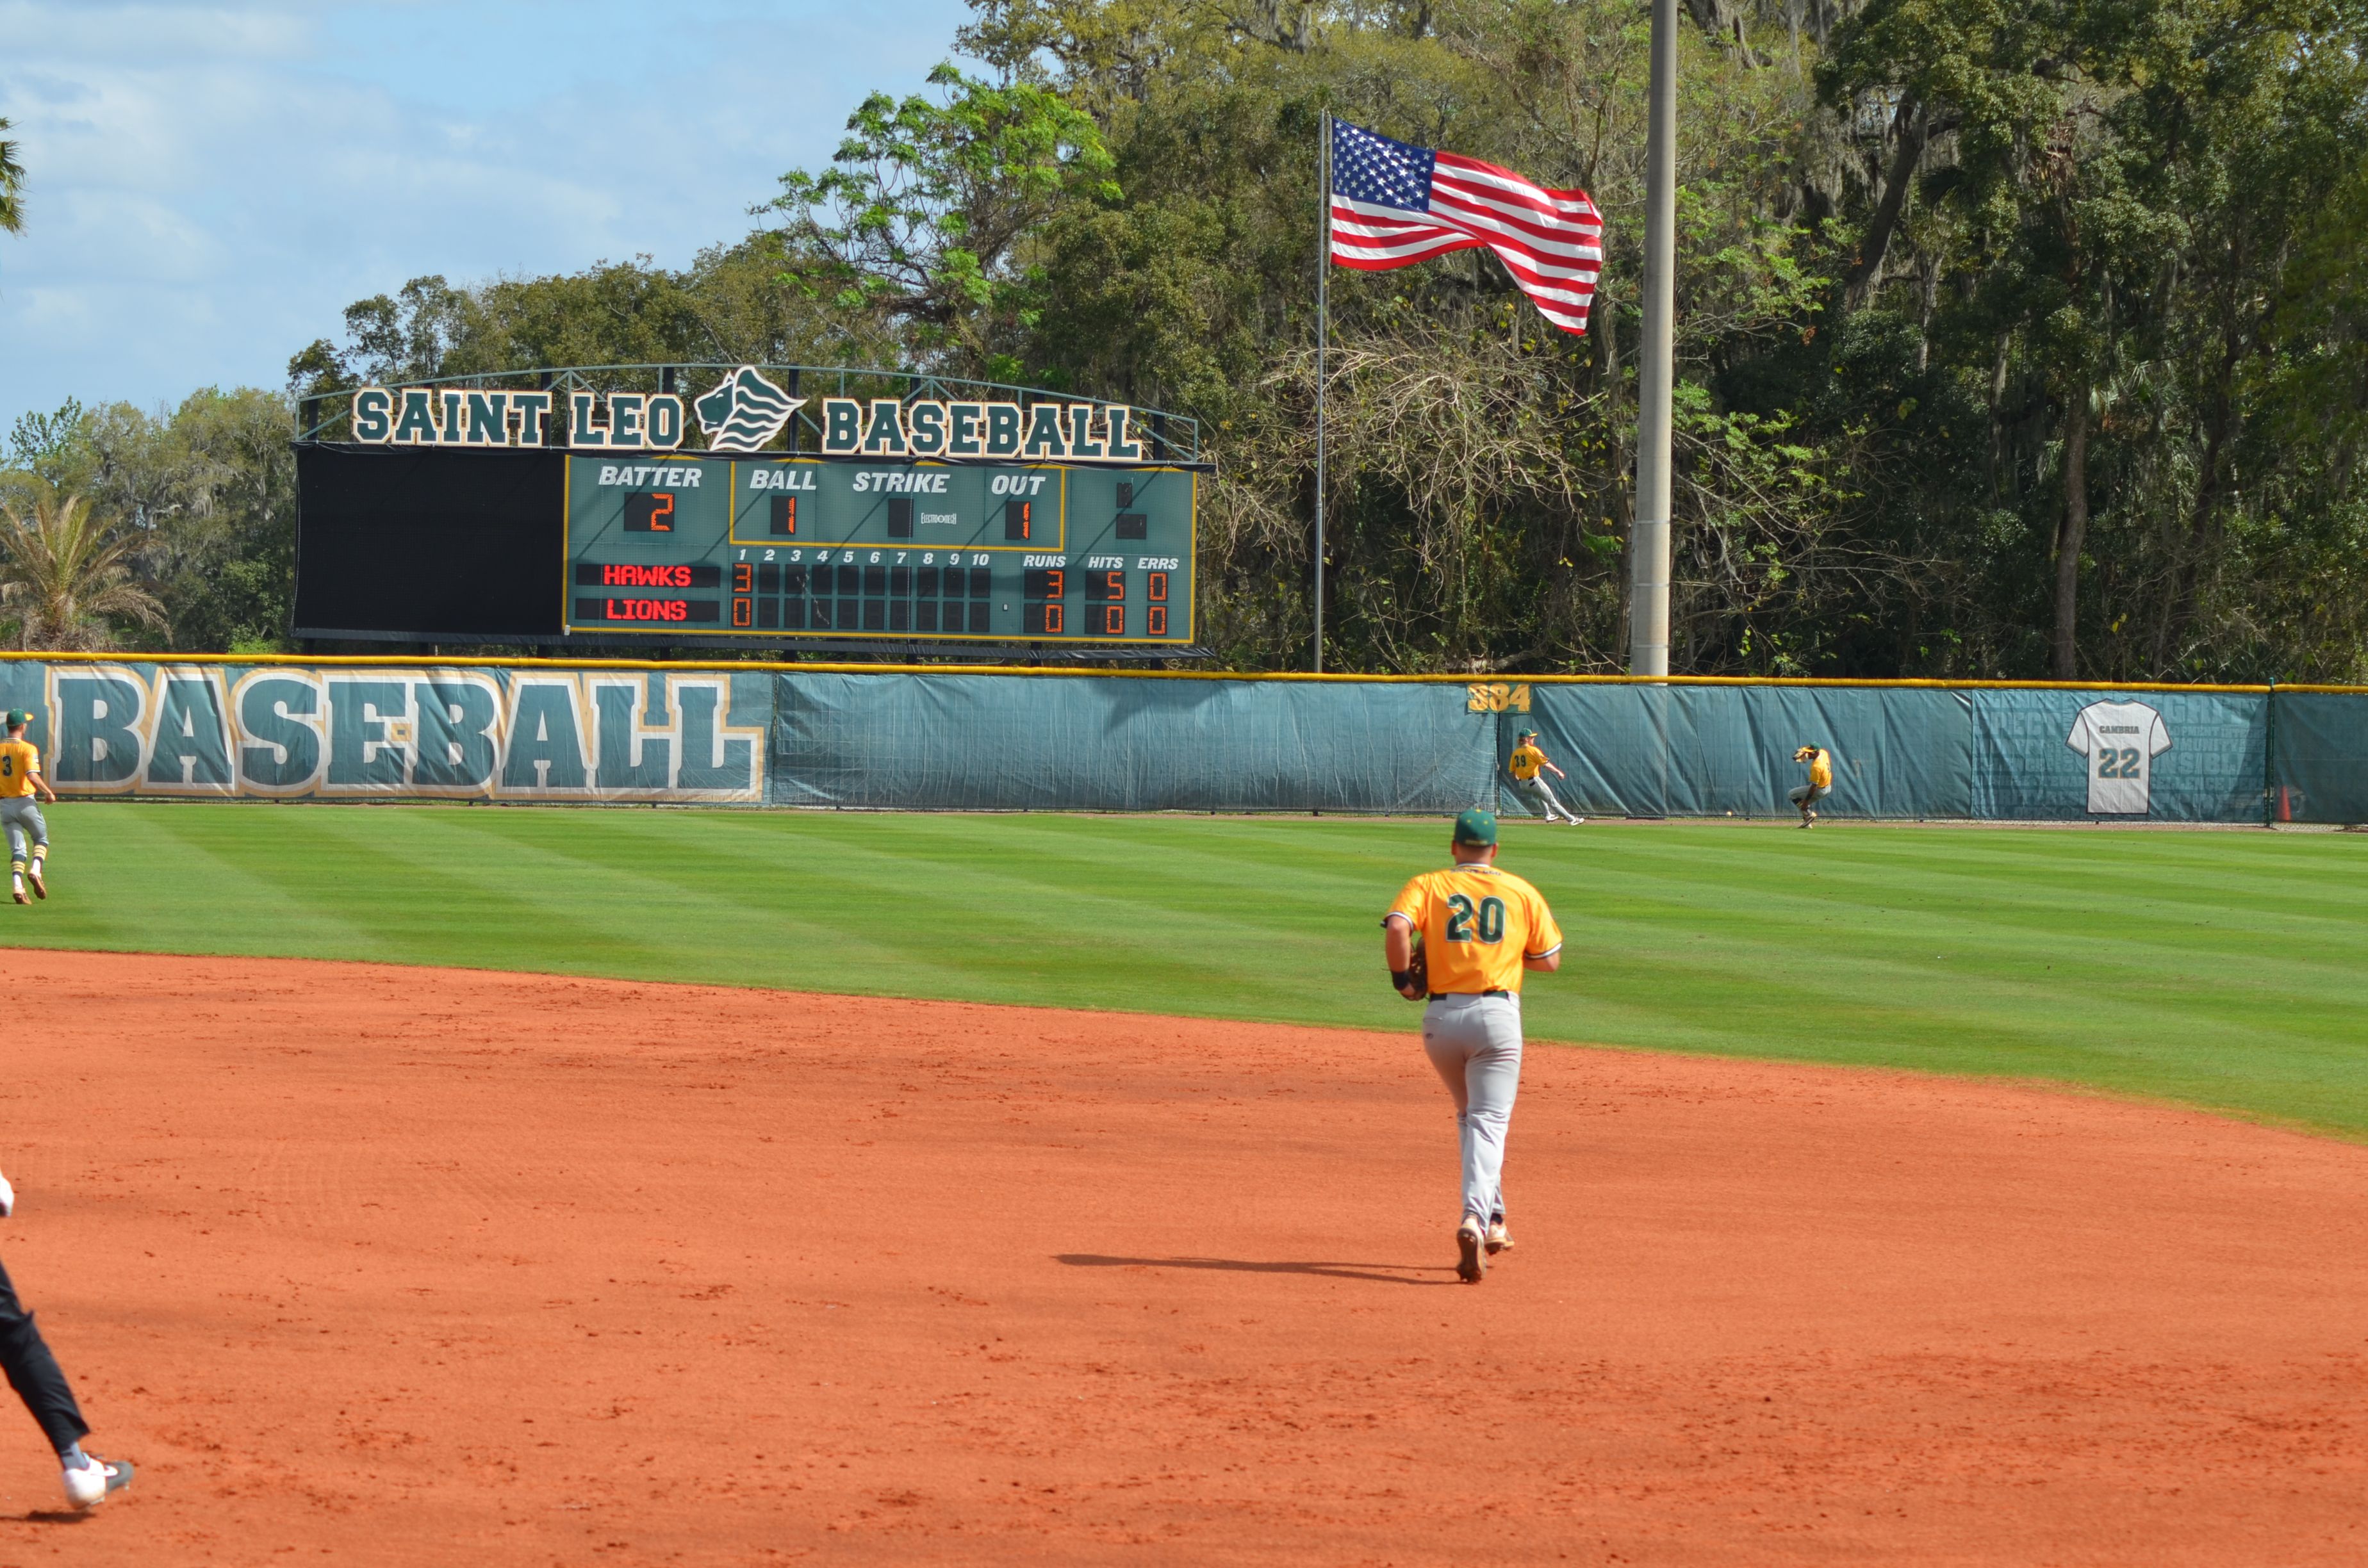 Mike Wyman runs to receive a throw from the outfield.